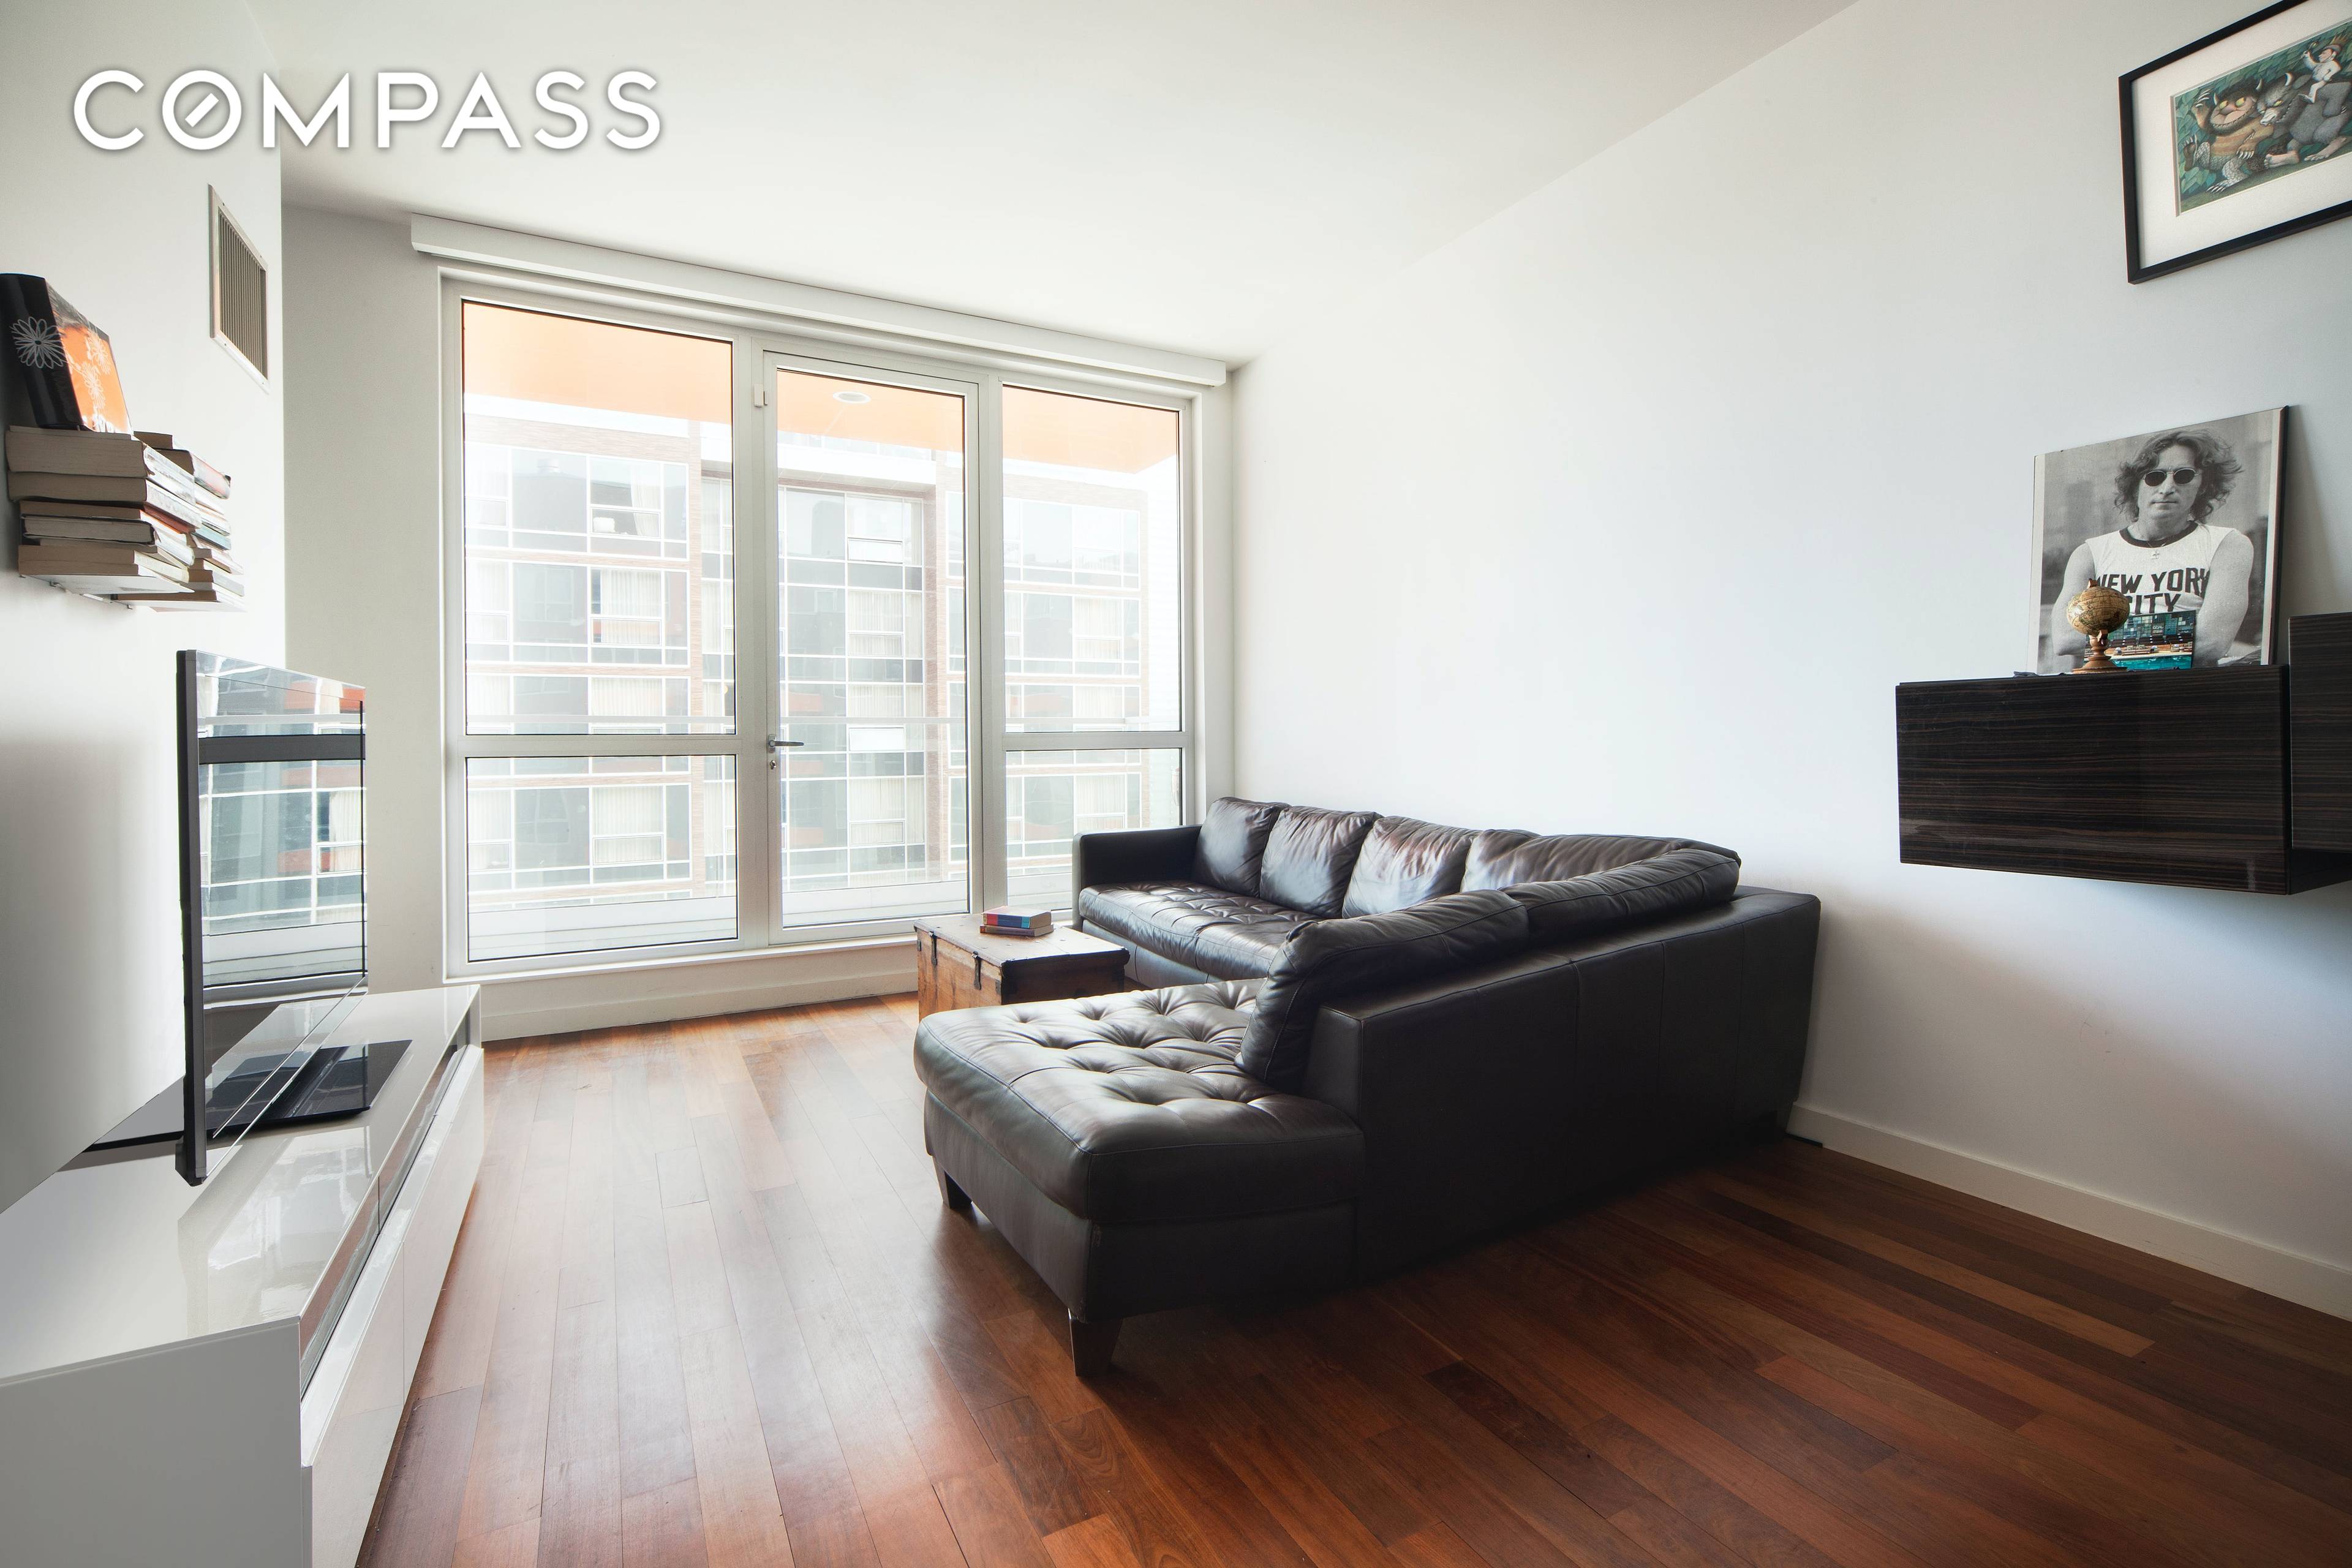 Available June 5th. Rising up on the chic north side of Williamsburg and steps to McCarren Park, this luxurious one bedroom residence provides you with an effortlessly elegant lifestyle with ...